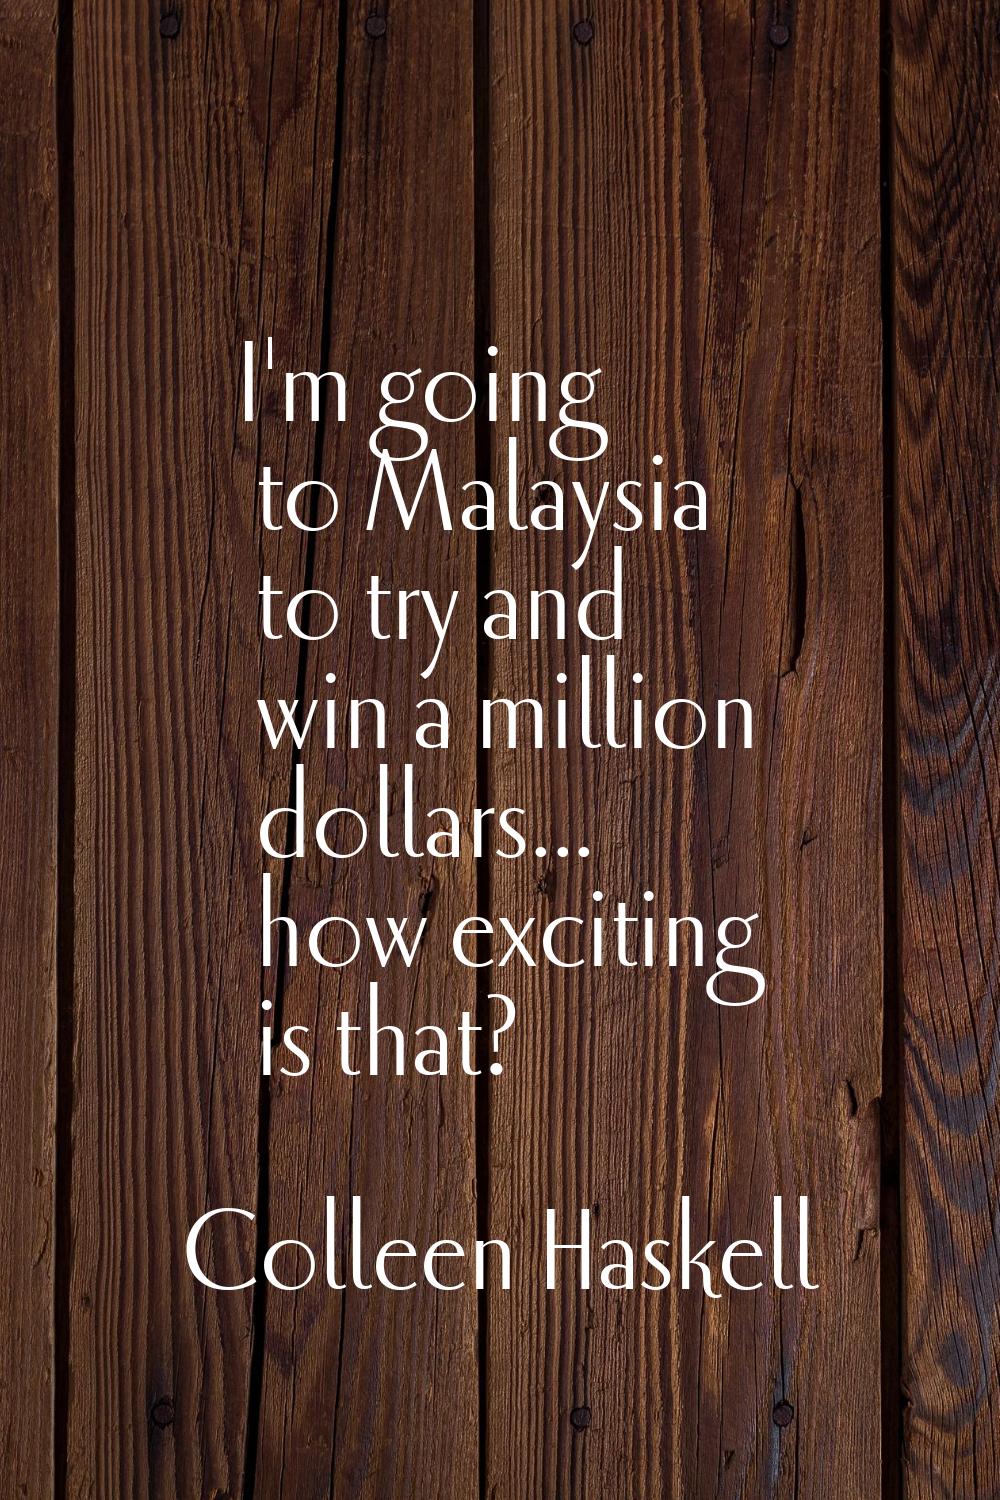 I'm going to Malaysia to try and win a million dollars... how exciting is that?